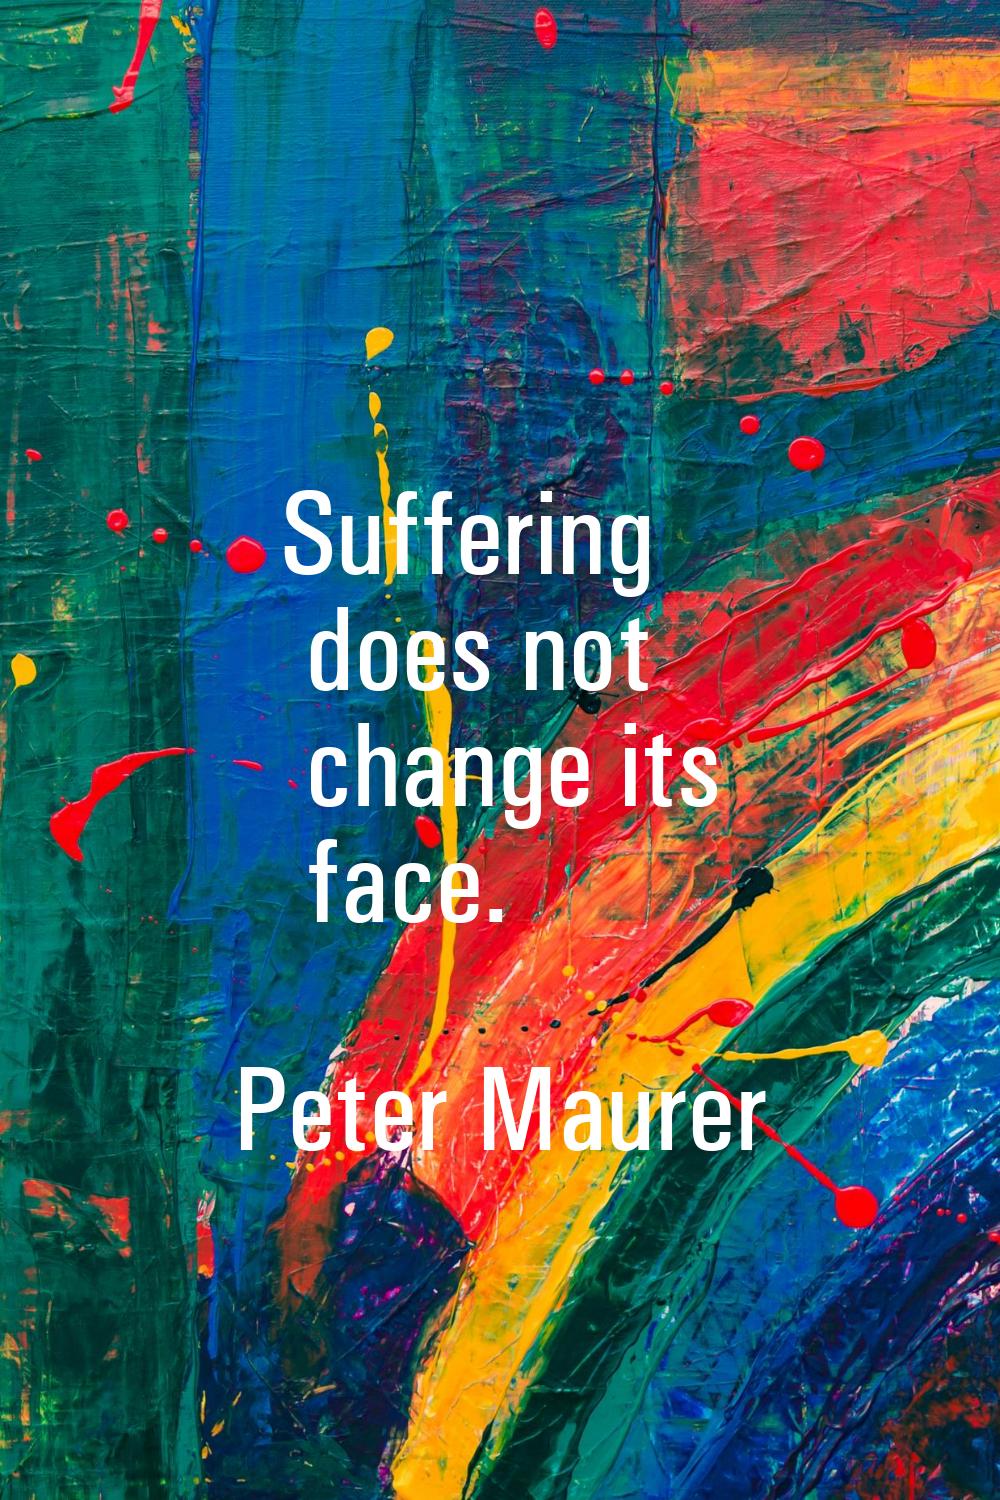 Suffering does not change its face.